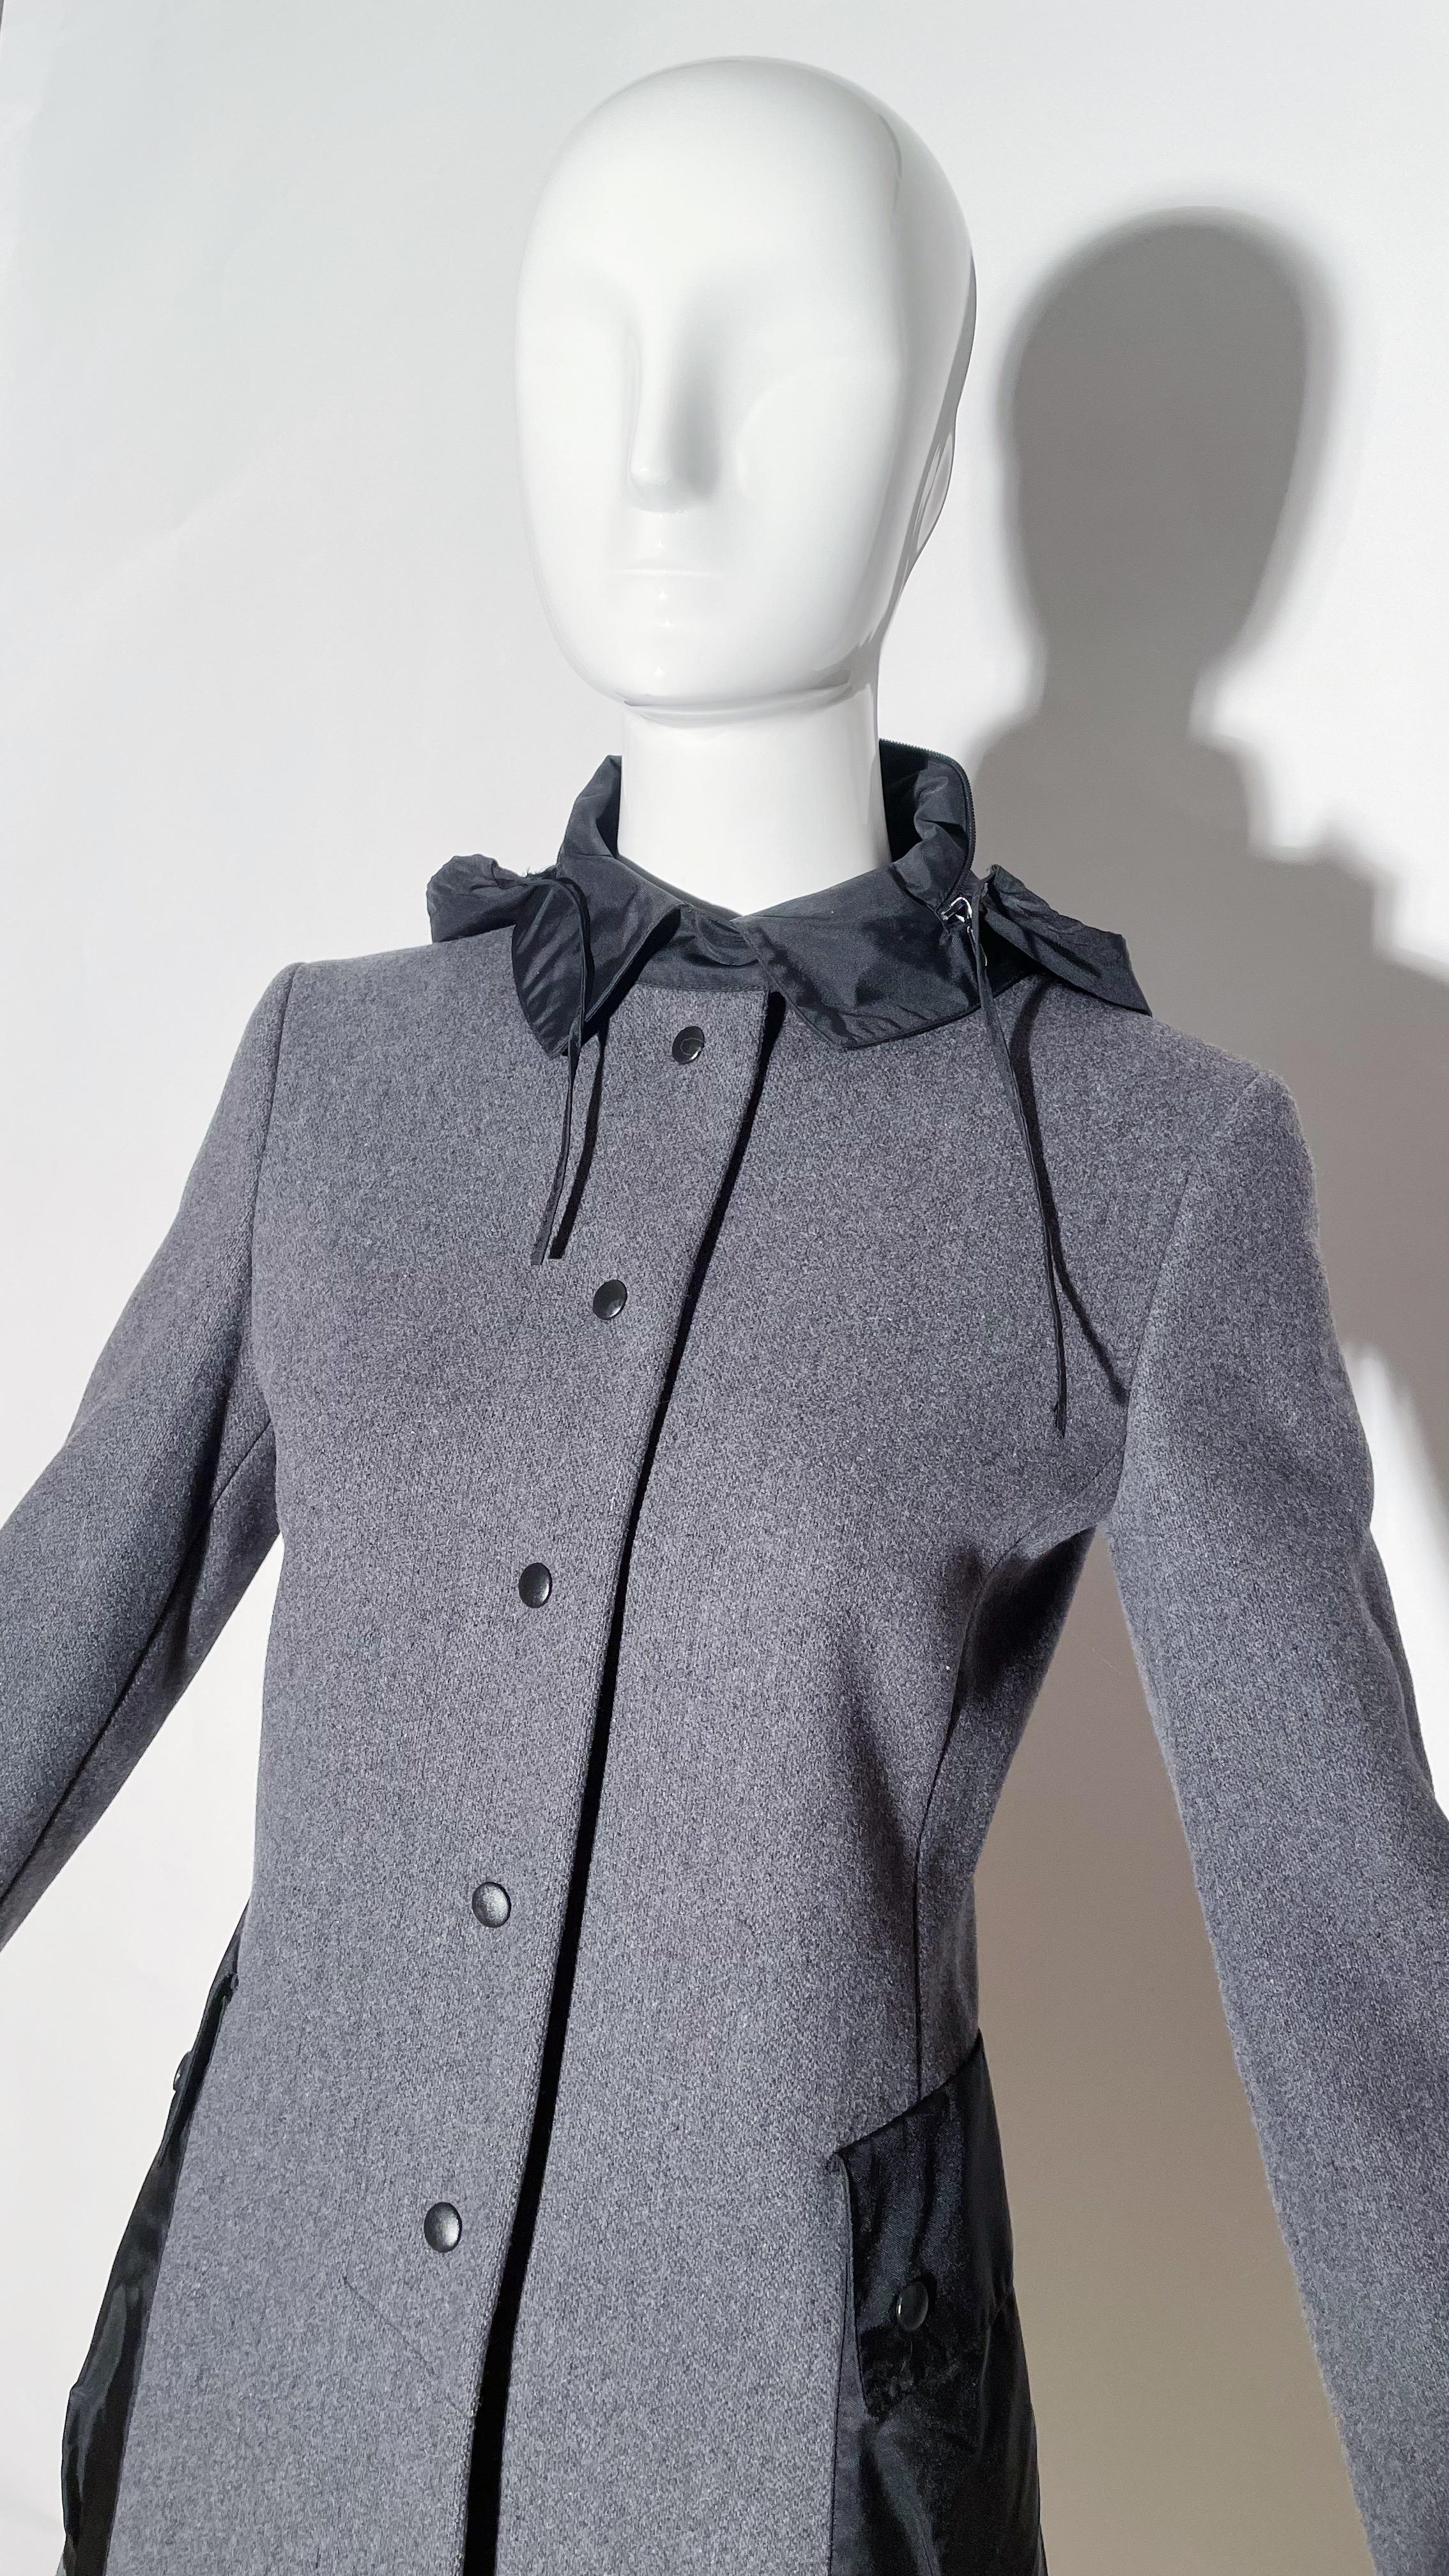 Miu Miu Grey Wool Coat In Excellent Condition For Sale In Waterford, MI